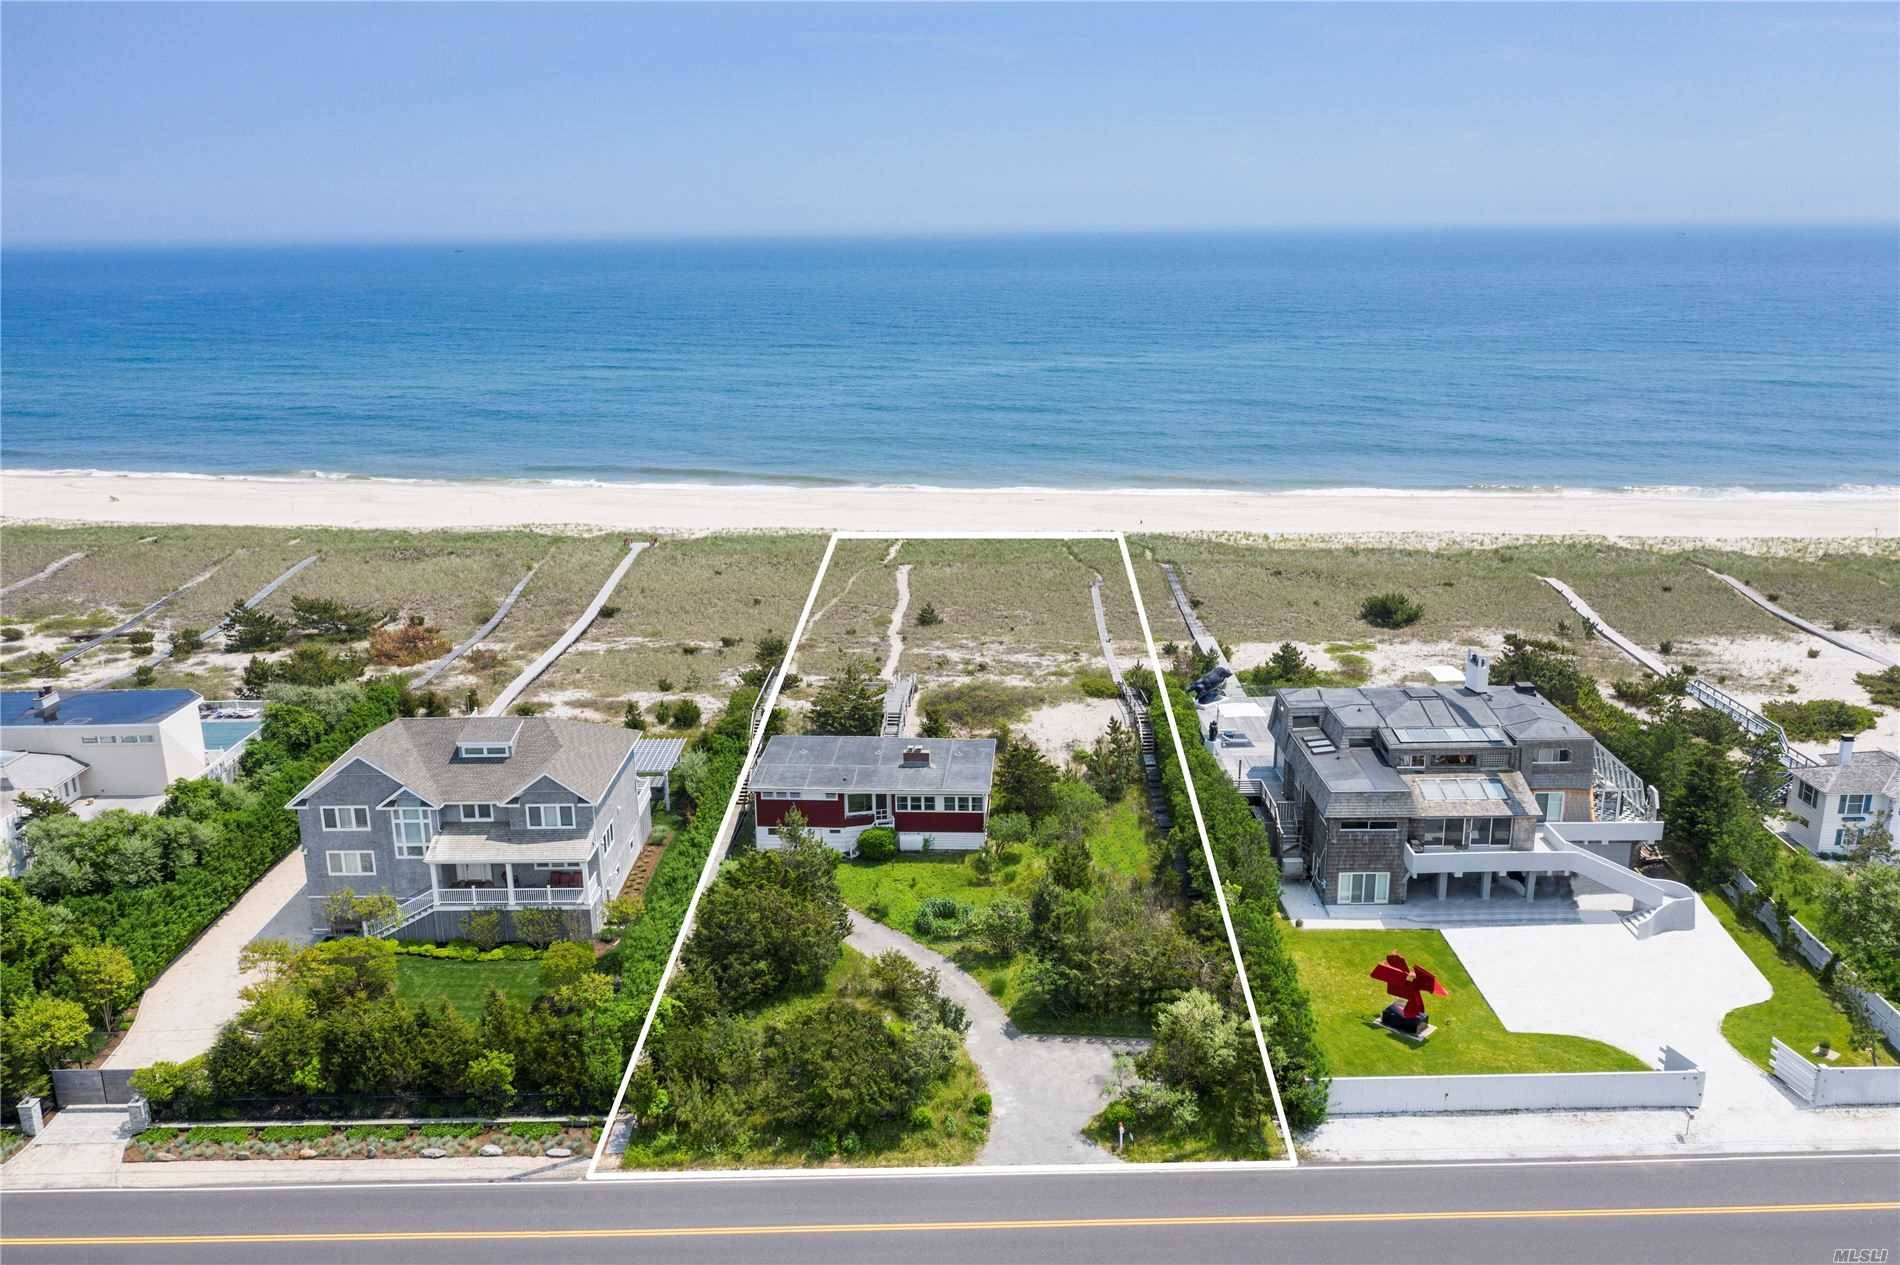 In one of the most desirable locations on all of Dune Road, this sun filled beach cottage on almost an acre of land offers a sizeable 100 feet of ocean ...